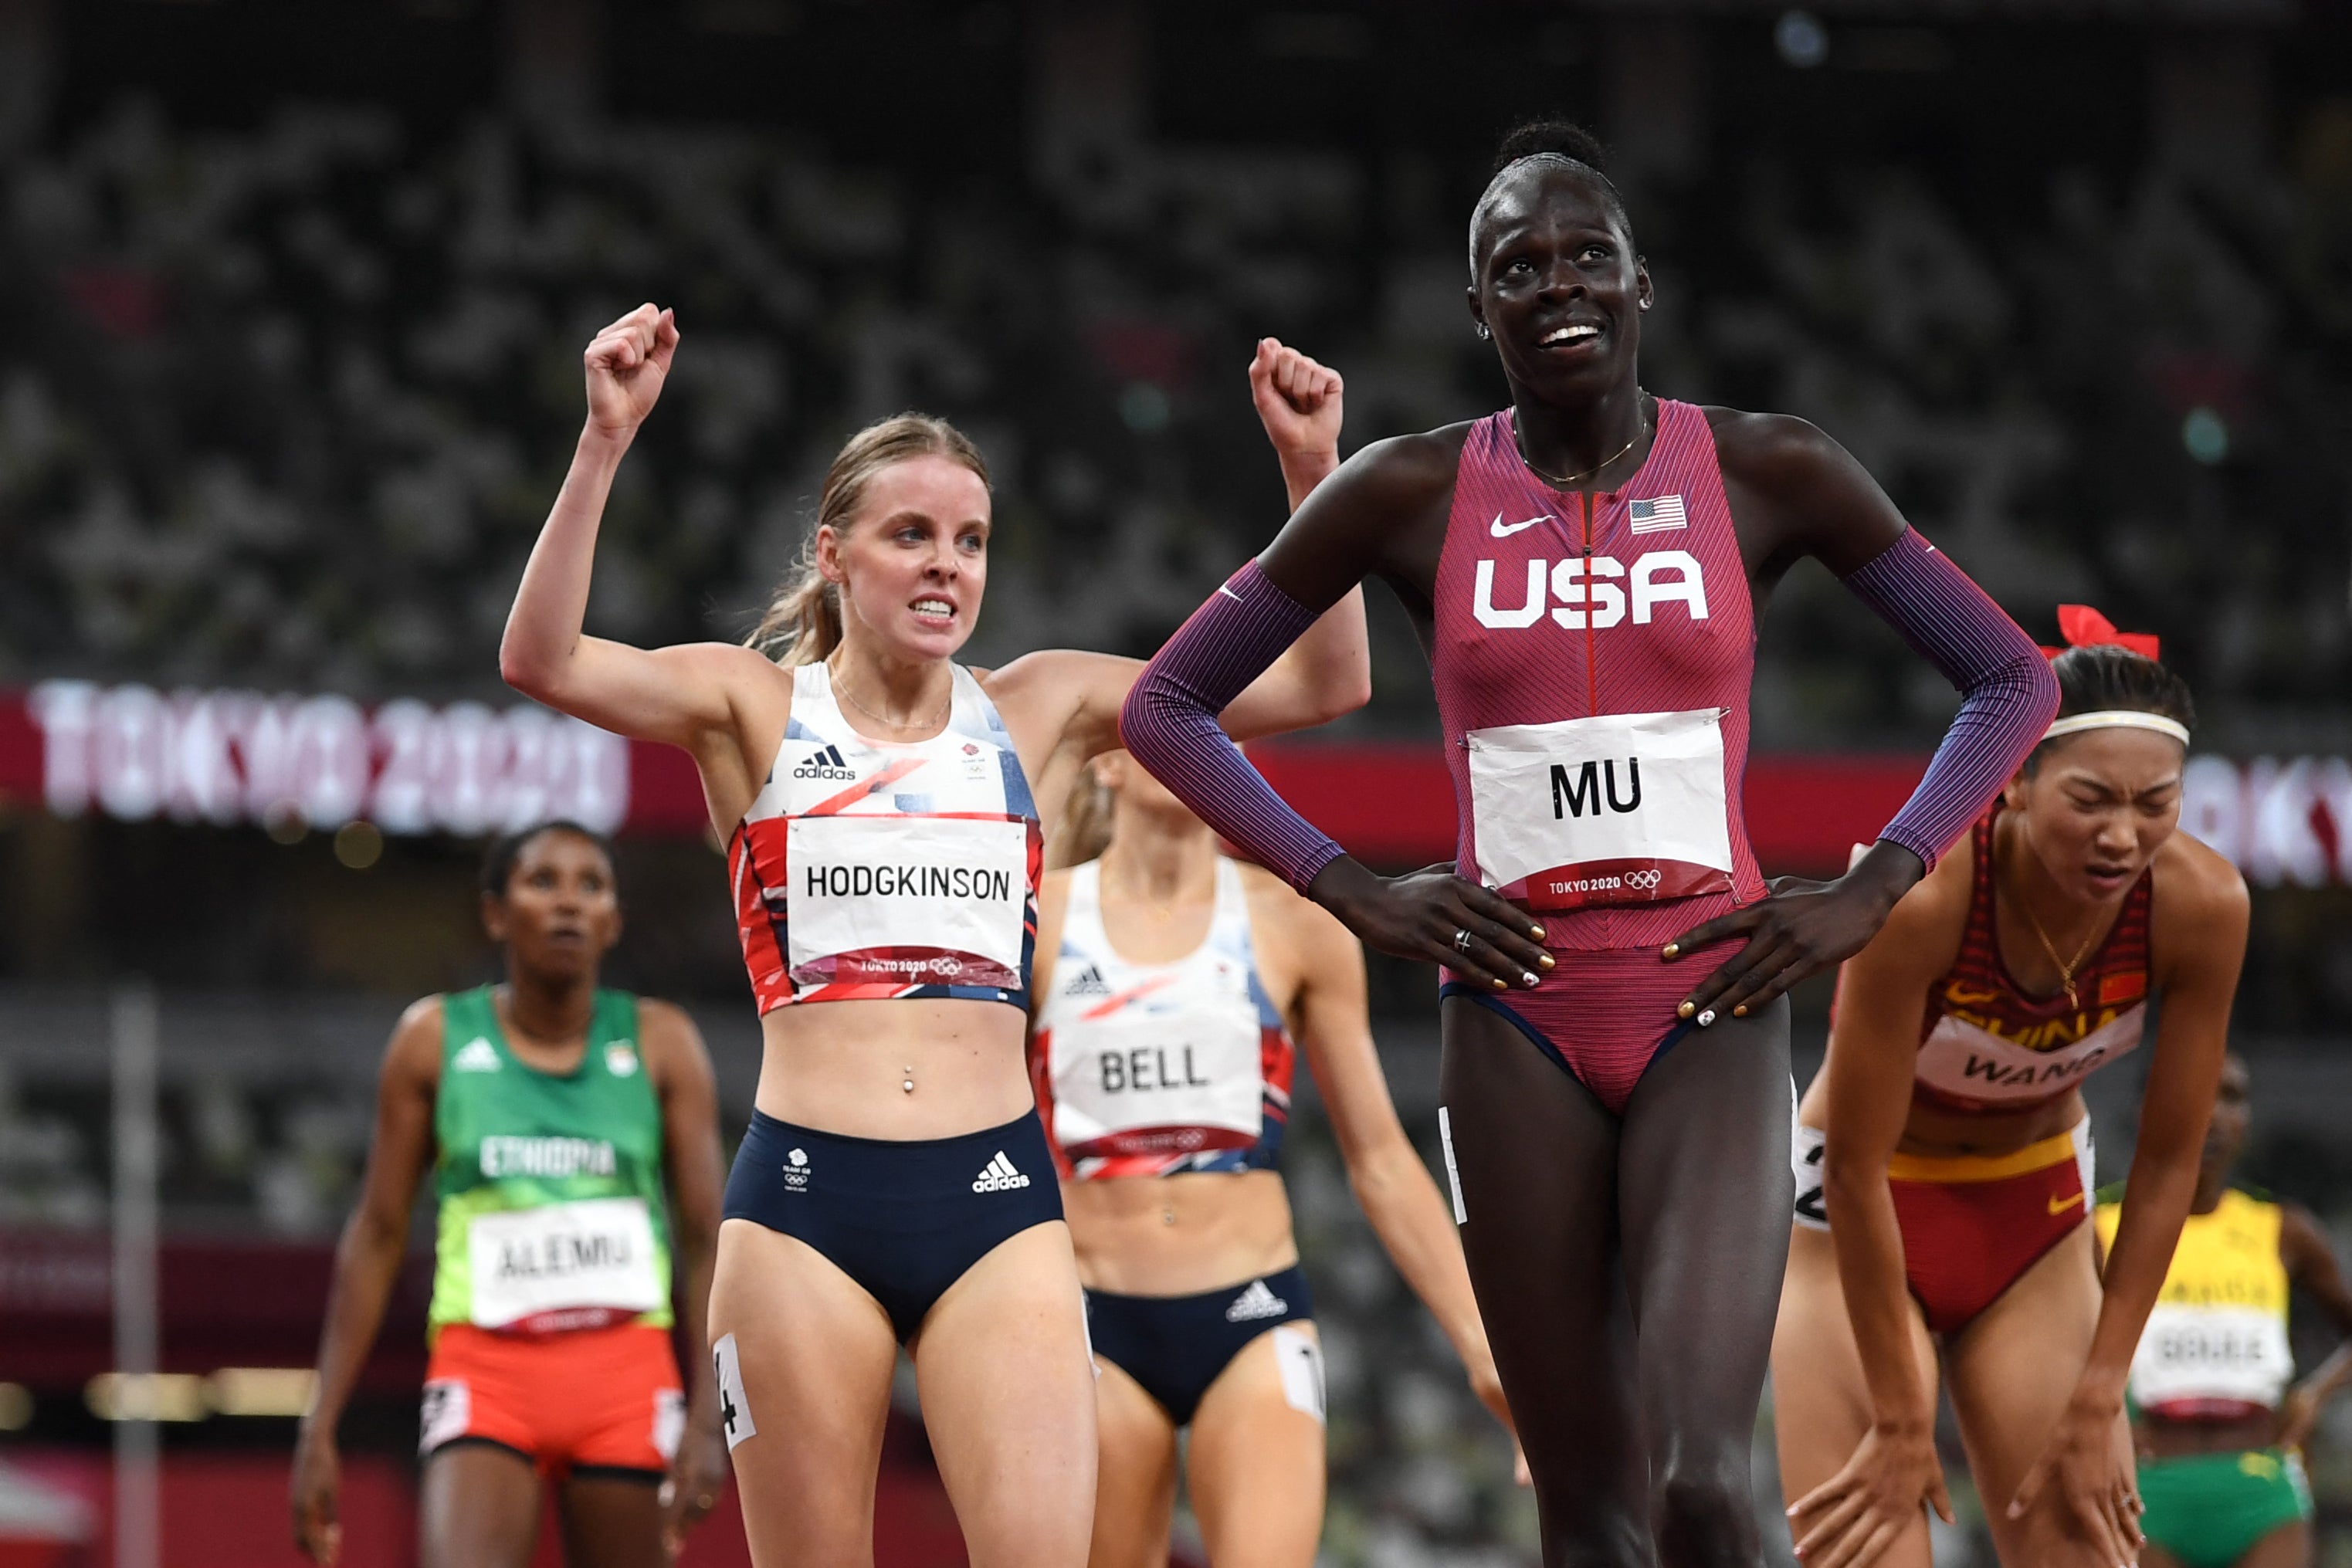 Olympic champion Athing Mu mulling whether to defend 800-meter world title  - Los Angeles Times